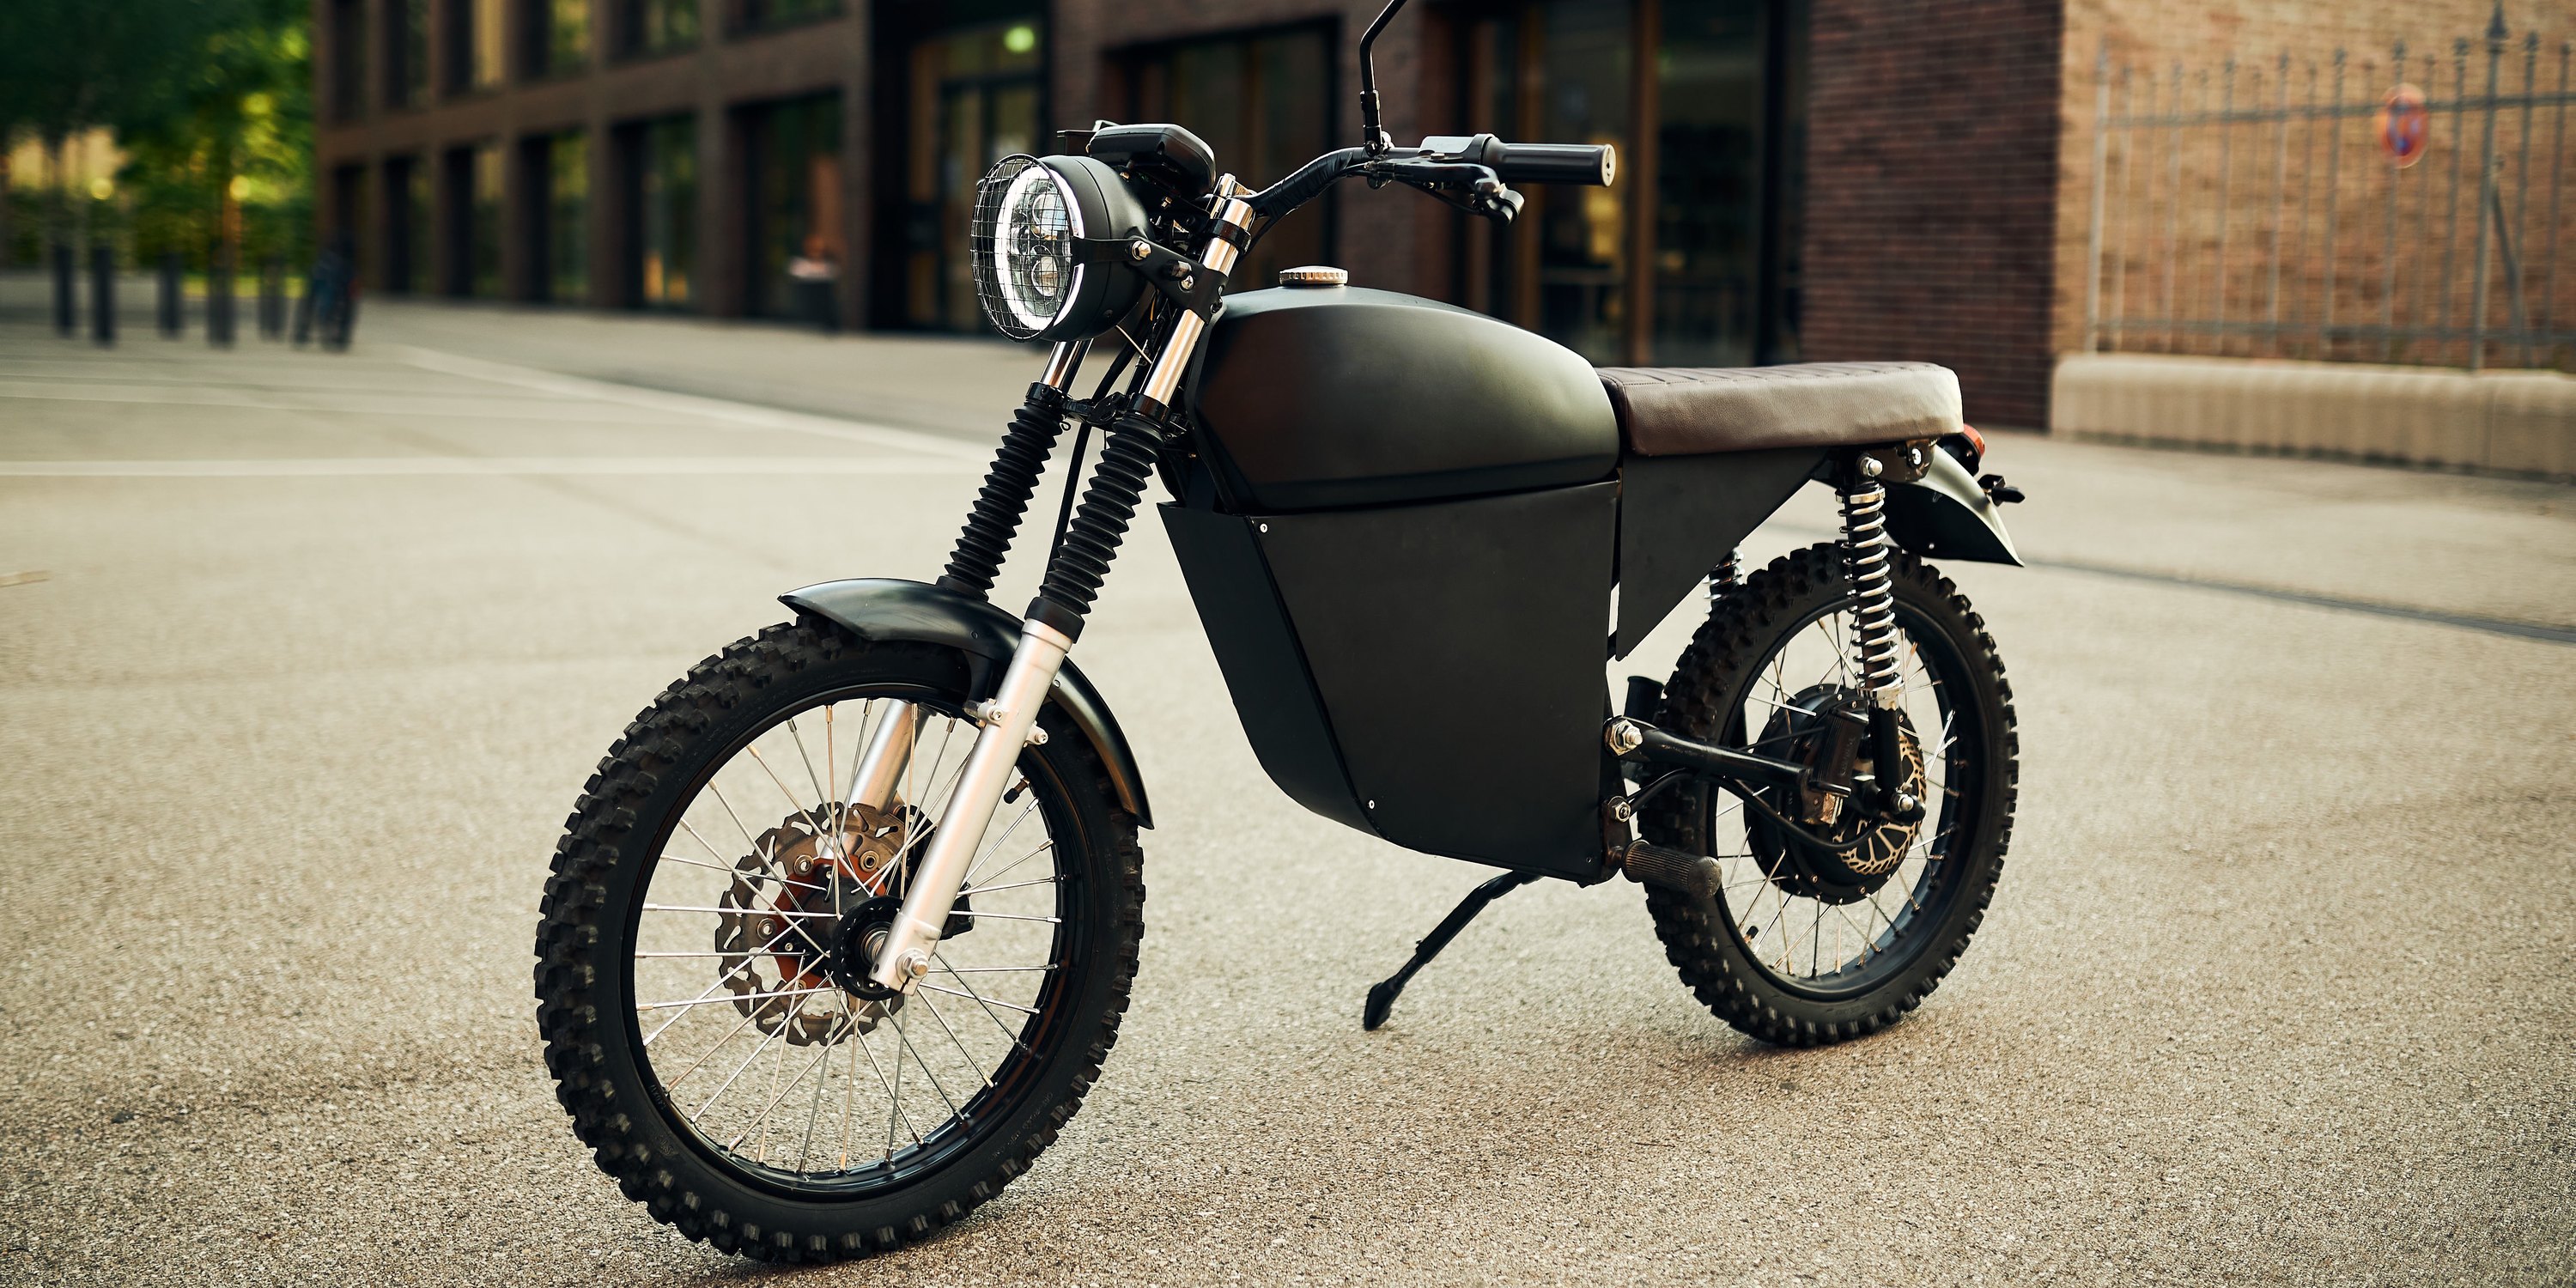 This Electric Motocross Bike Is Built For Experts and Joyriders Alike